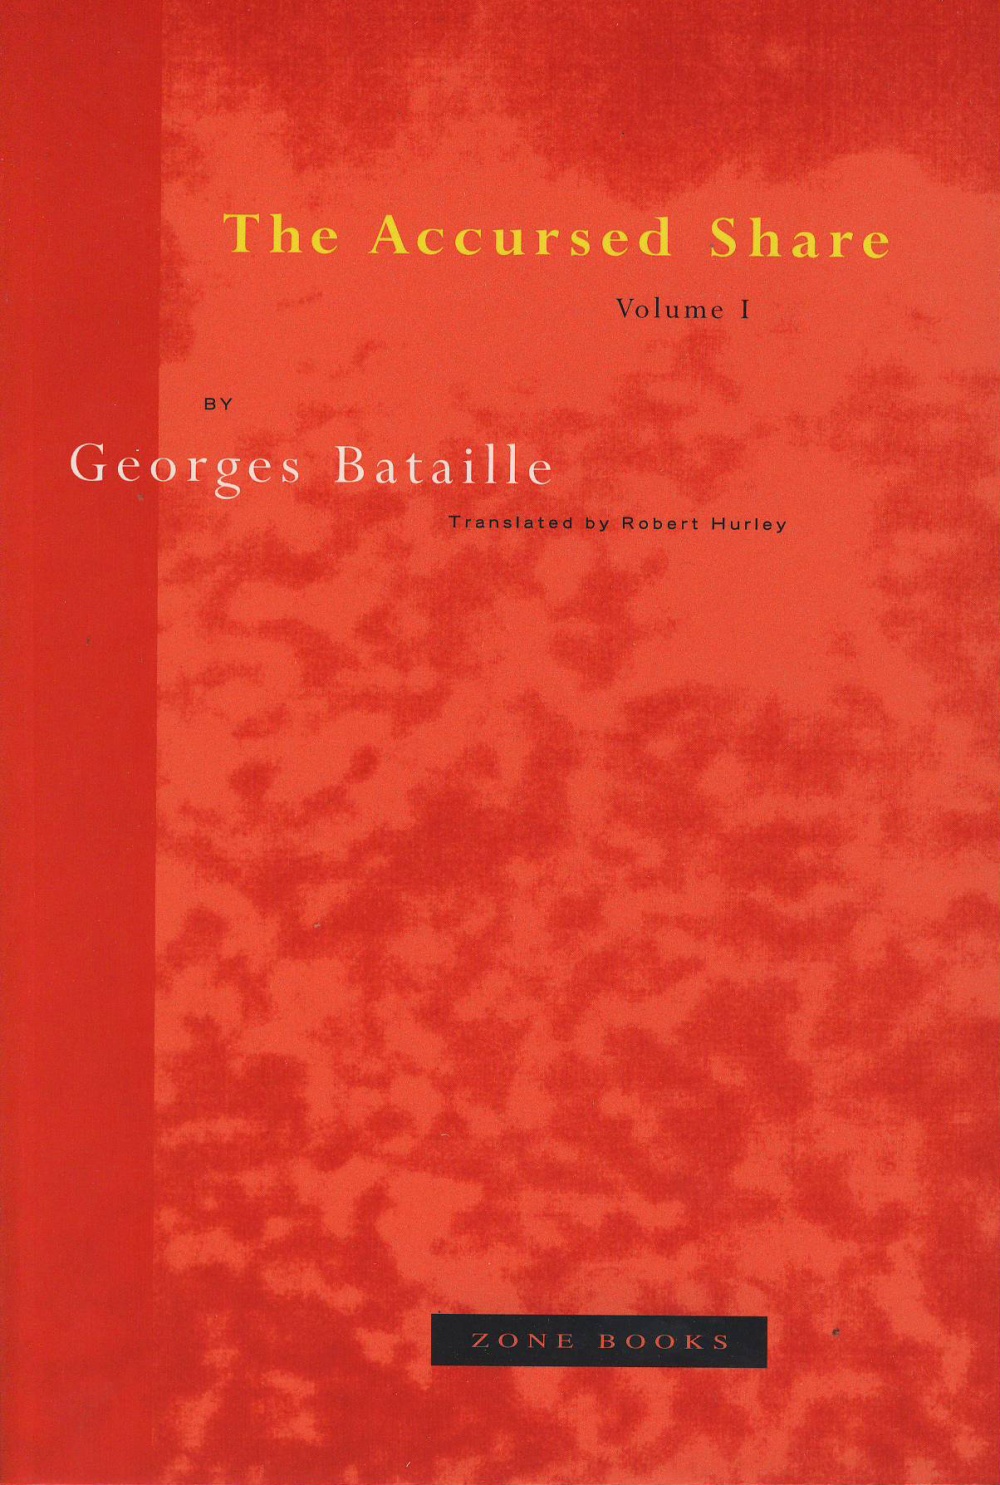 Georges Bataille: The Accursed Share, Volume 1